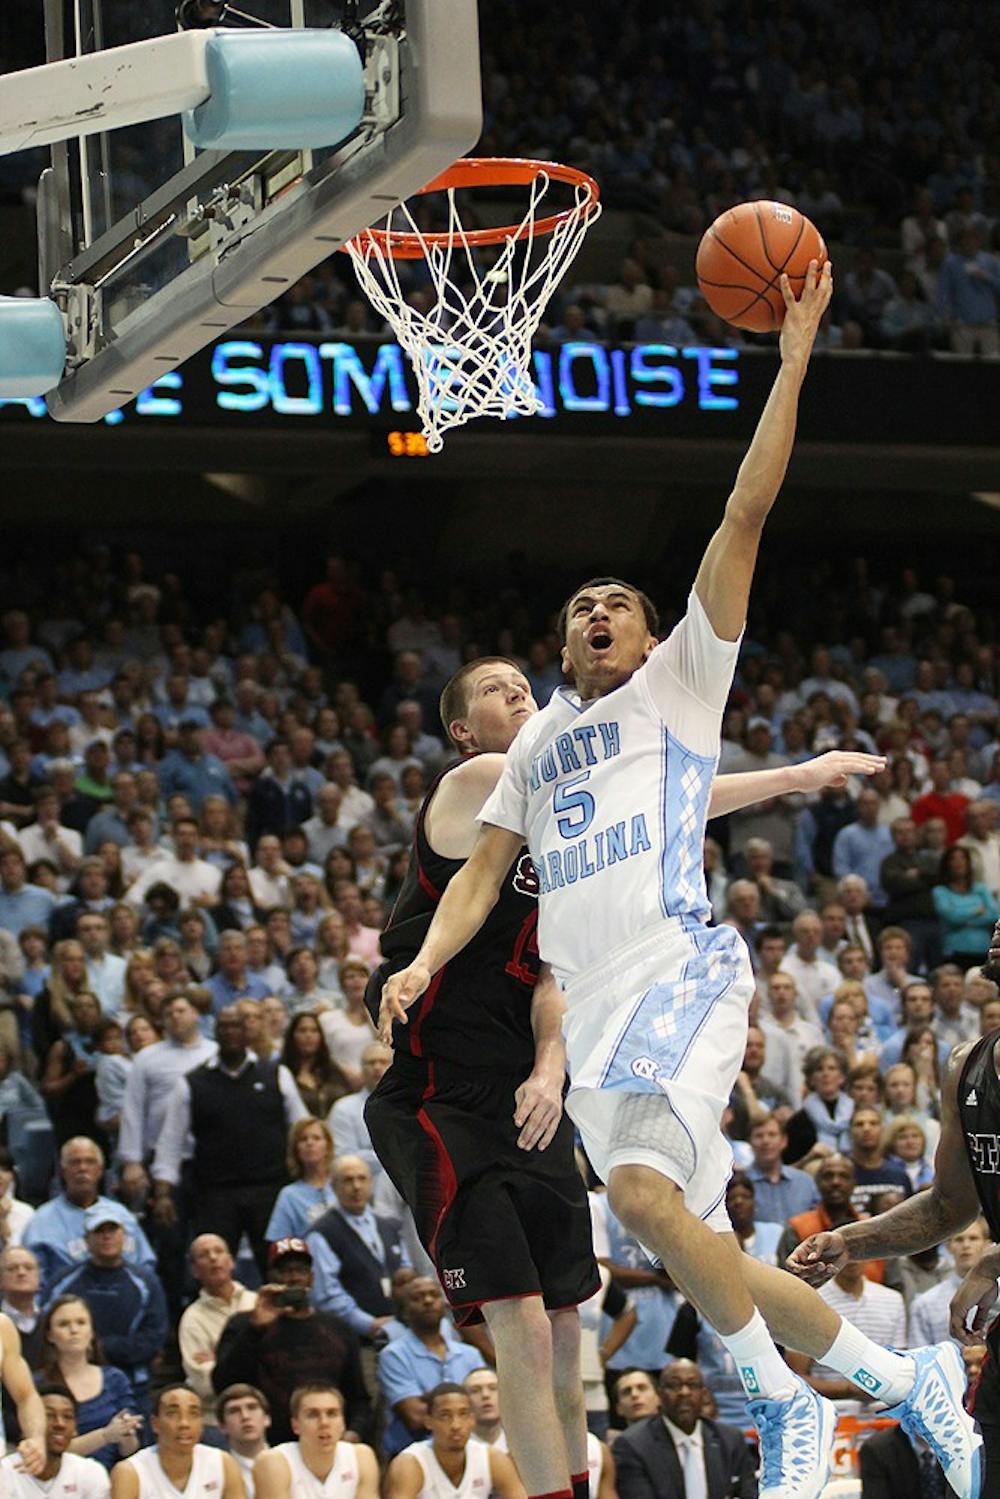 	Marcus Paige blows by Scott Wood on the way to the basket during the second half of Saturday’s game. Paige scored 14 points, dished out 11 assists and committed no turnovers against N.C. State. 